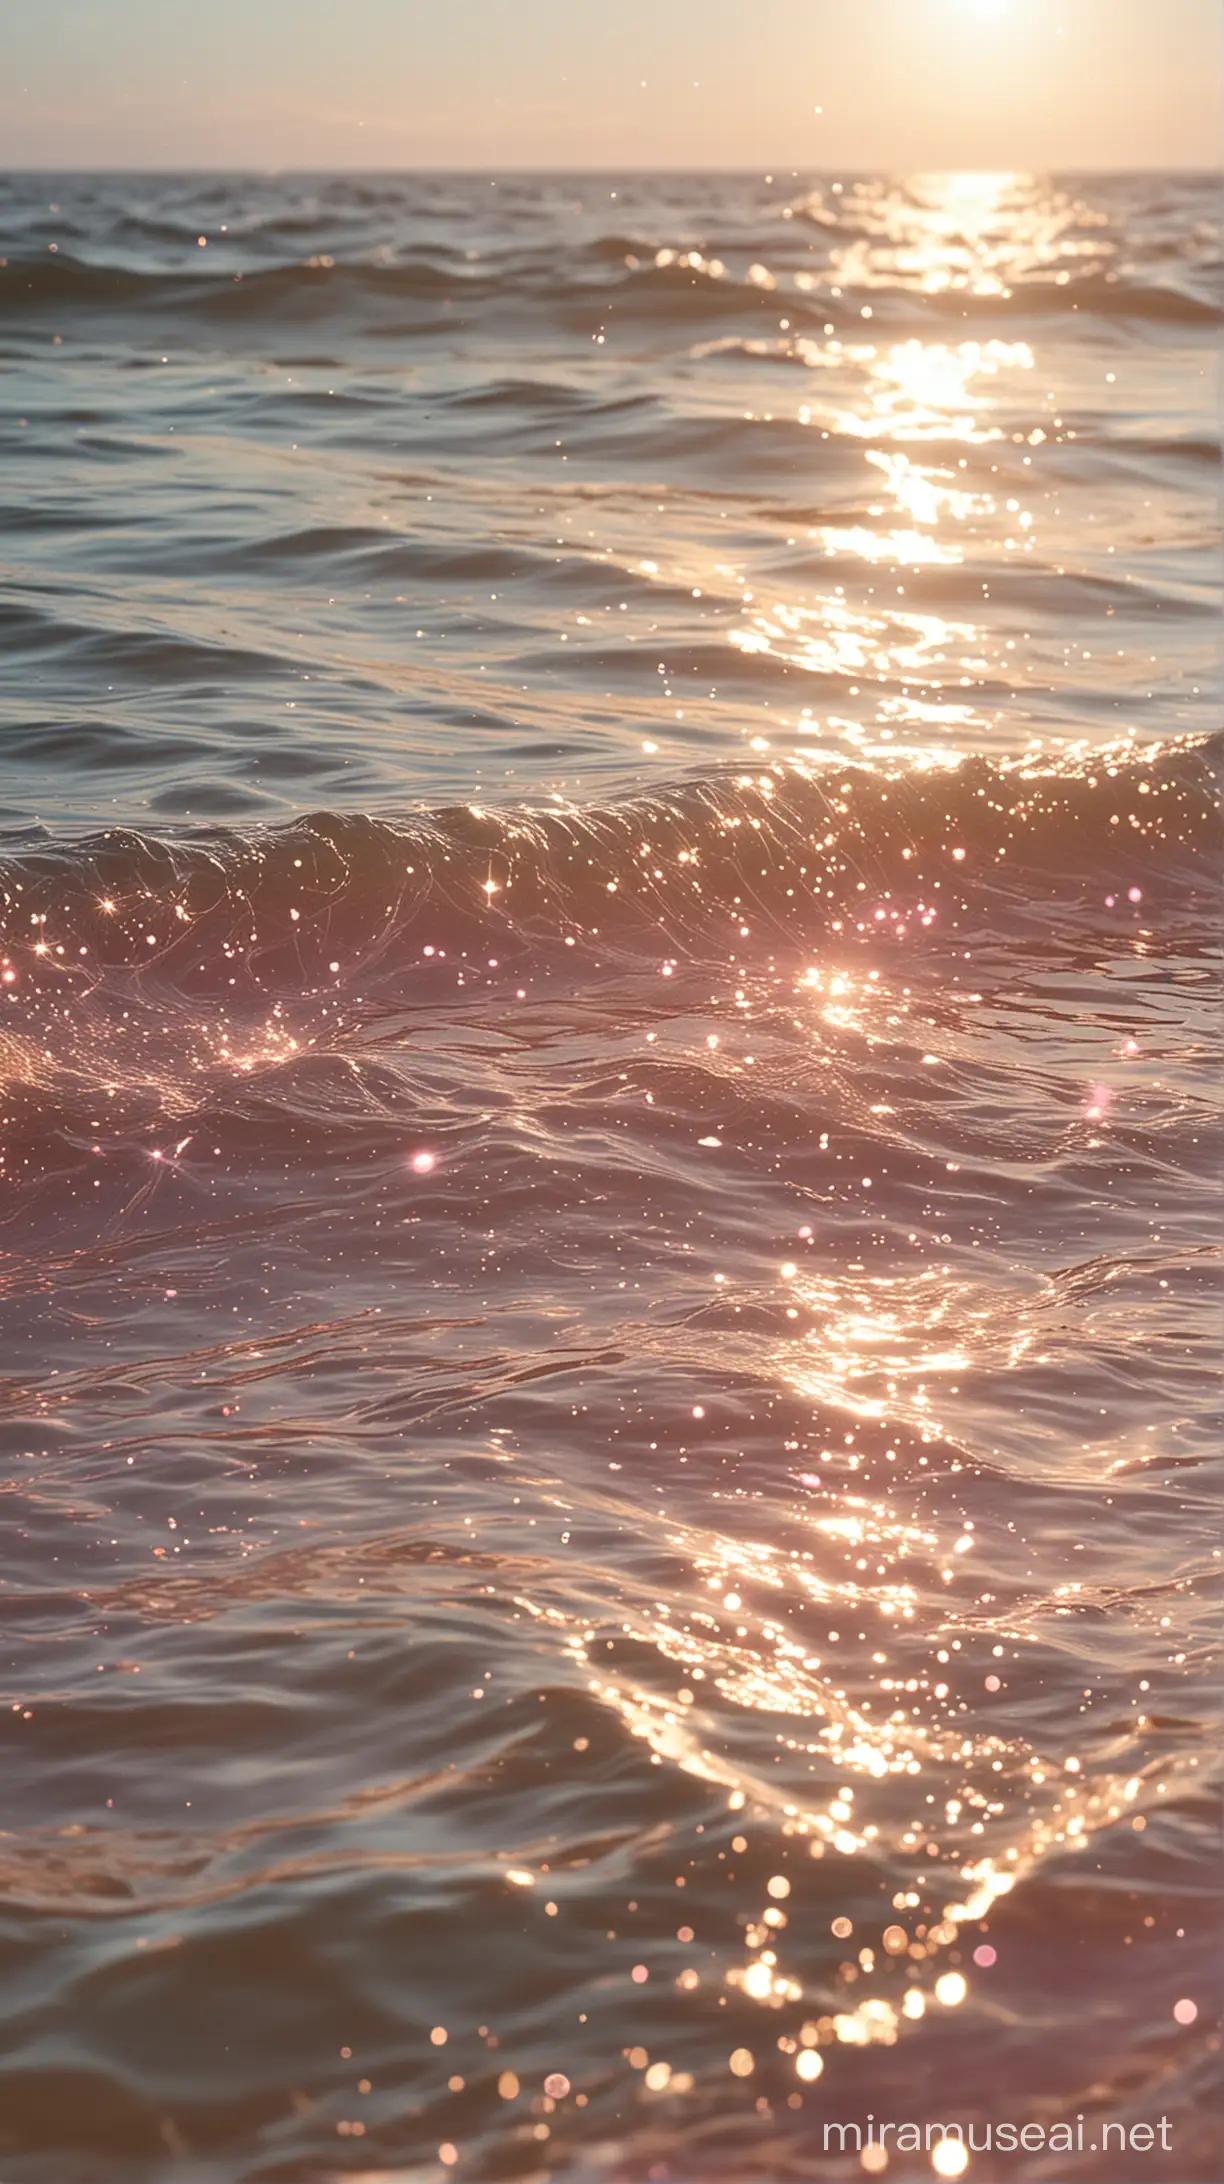 an image with sparkles on the sea, in the style of whimsical and dreamlike, light gold and pink, hyper-realistic water, stimwave, fairycore, blurry details, blink-and-you-miss-it detail